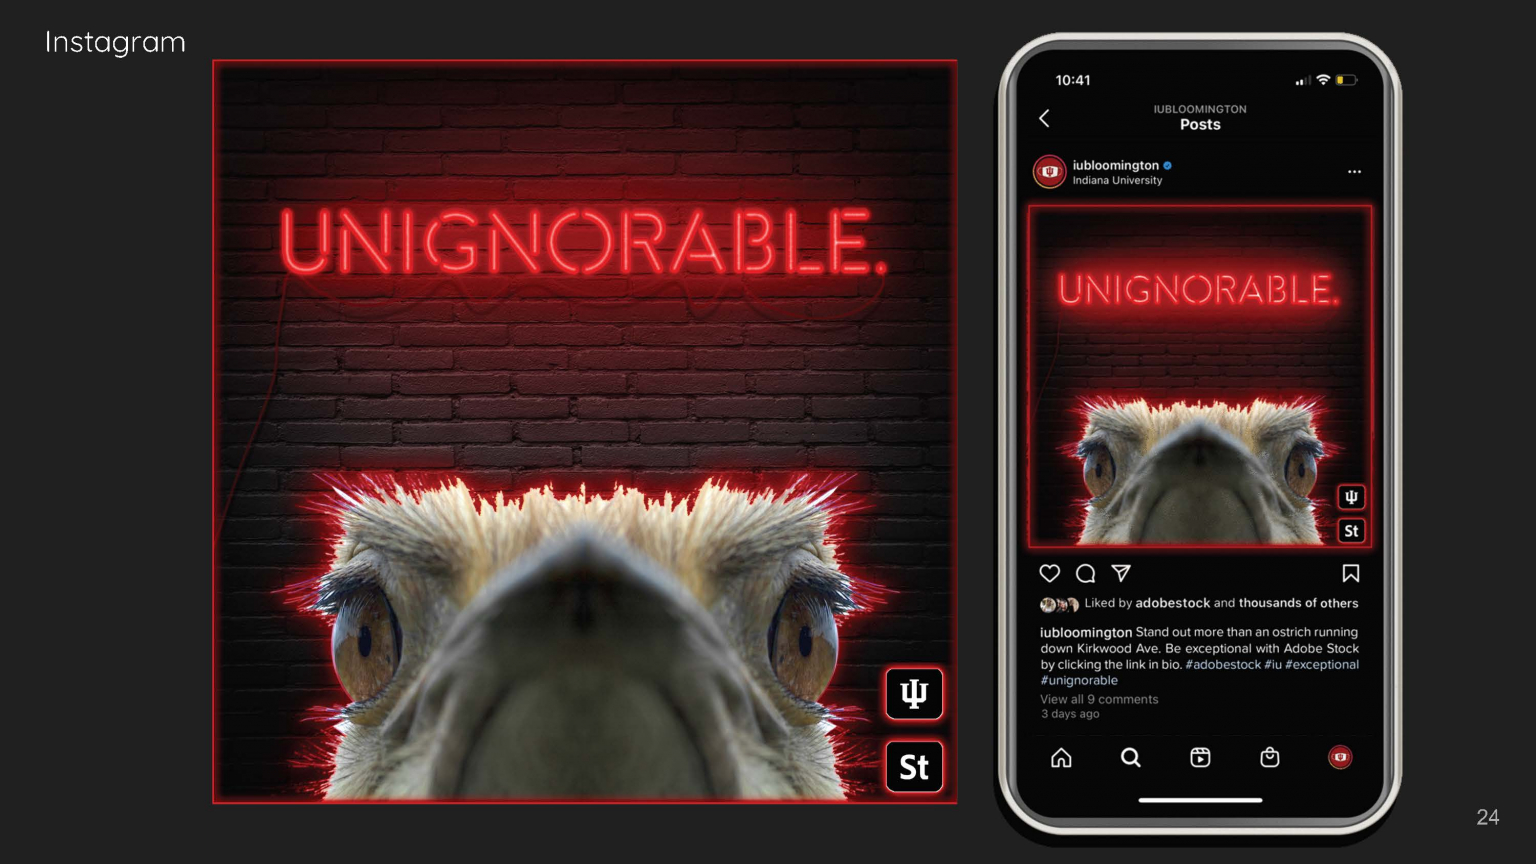 A mockup of an Instagram ad. An ostrich head appears under the word "unignorable" written in neon on a brick wall. It's posted to the @iubloomington account with the caption: Stand out more than an ostrich running down Kirkwood Ave. Be exceptional with Adobe Stock by clicking the link in bio. #adobestock #iu #exceptional #unignorable